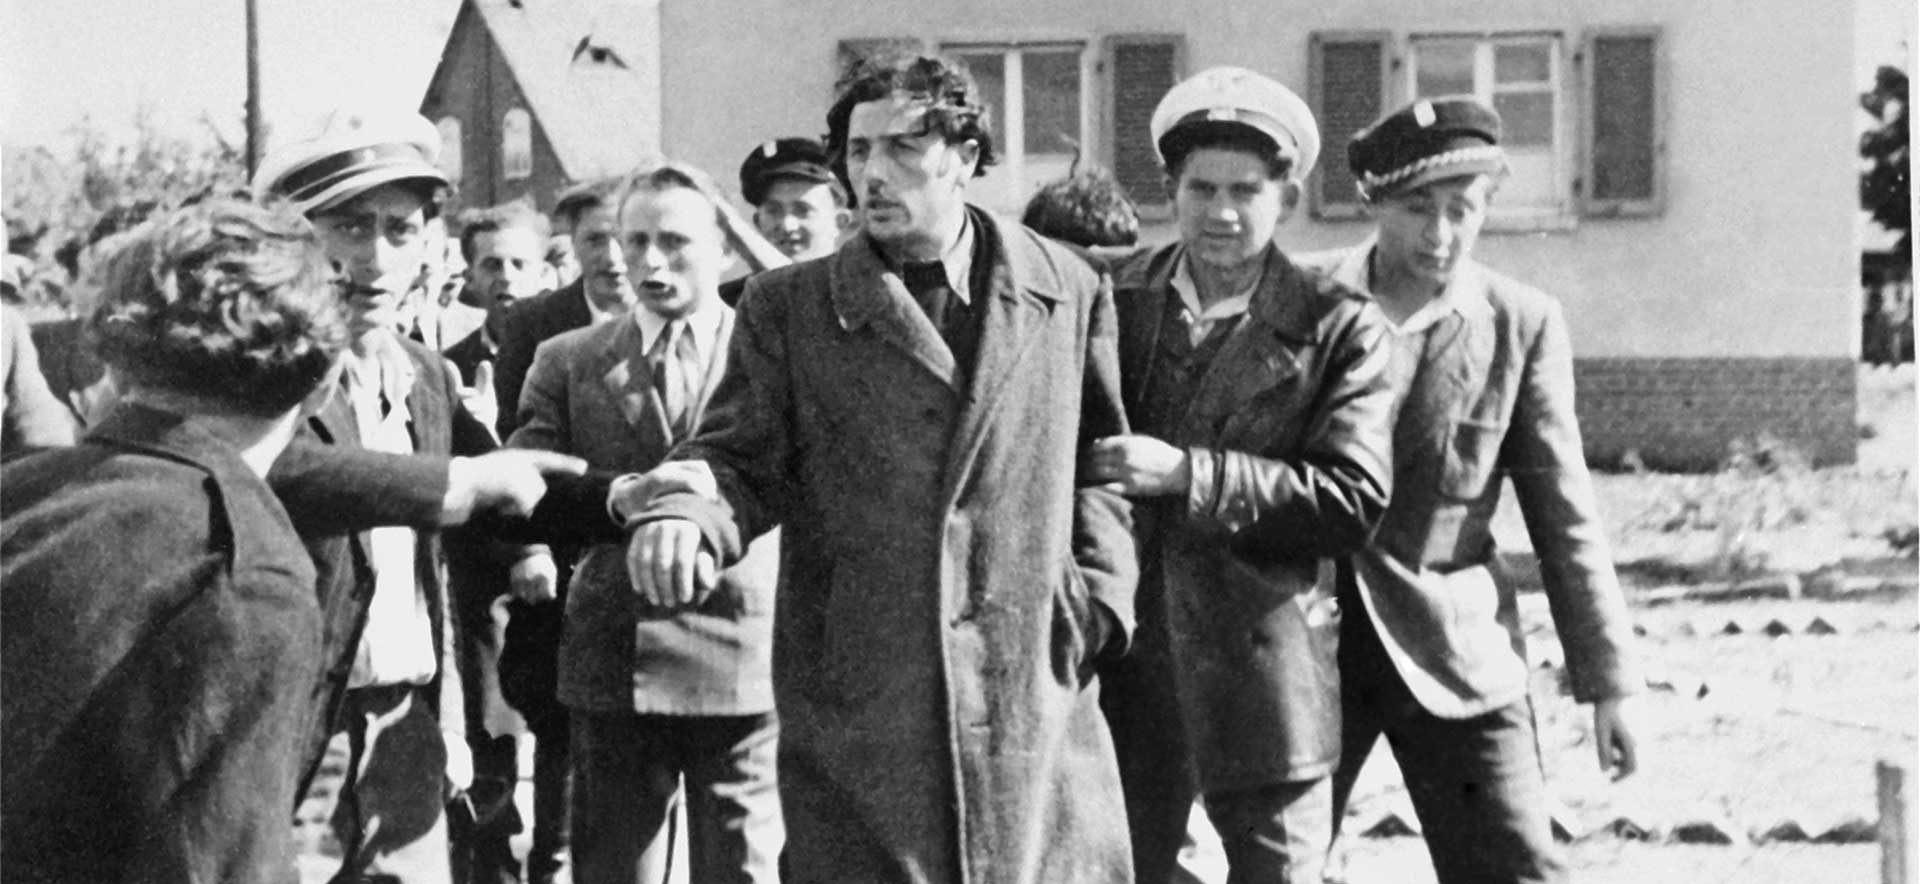 Jewish police at a displaced persons camp restrain a man